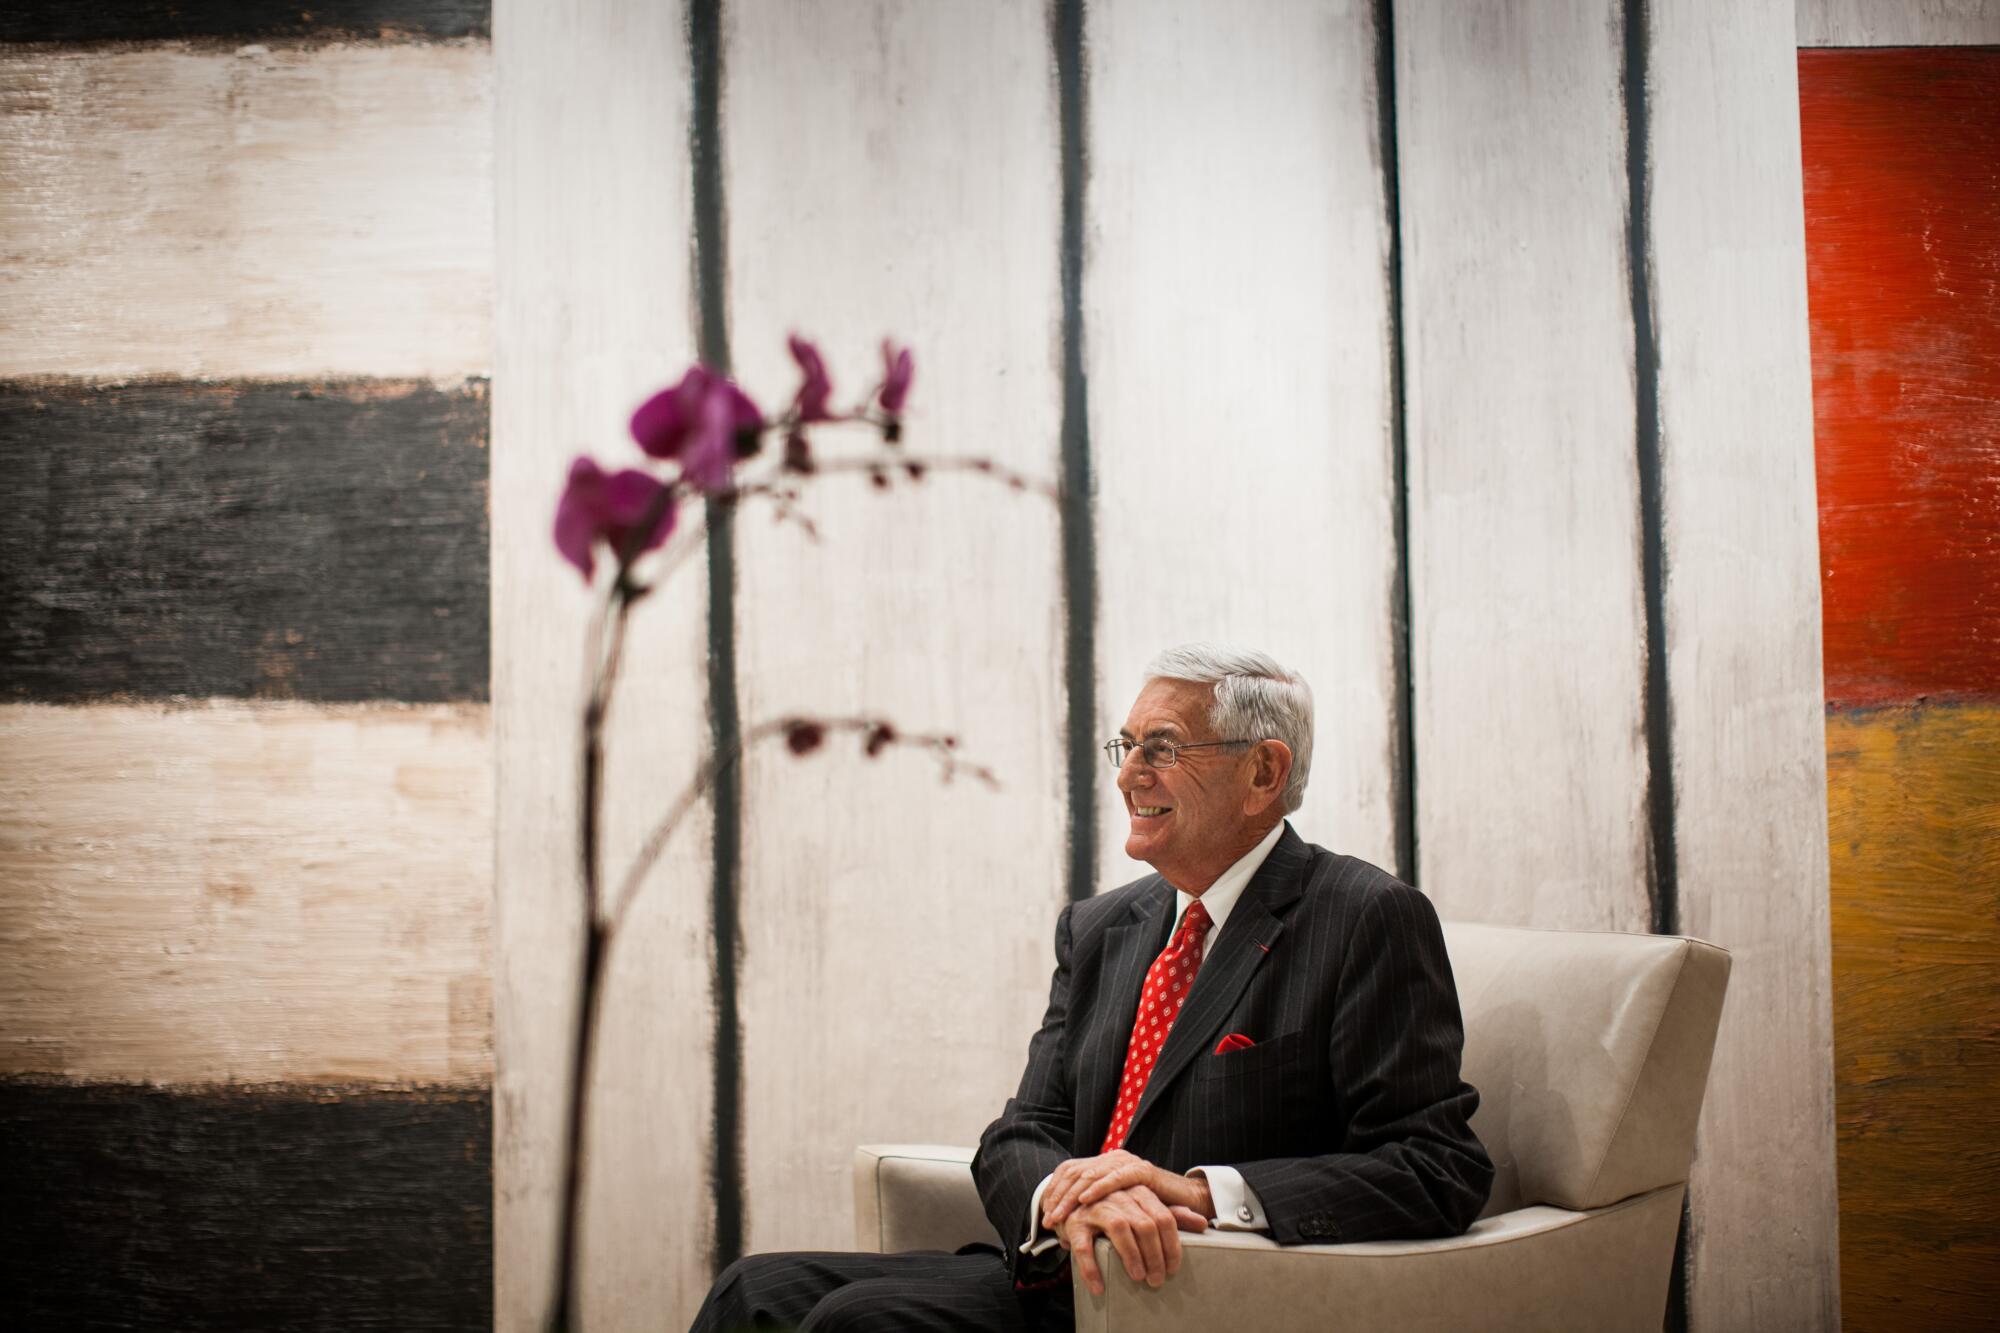 Eli Broad sits in an armchair in front of an oversized painting with black and white stripes.